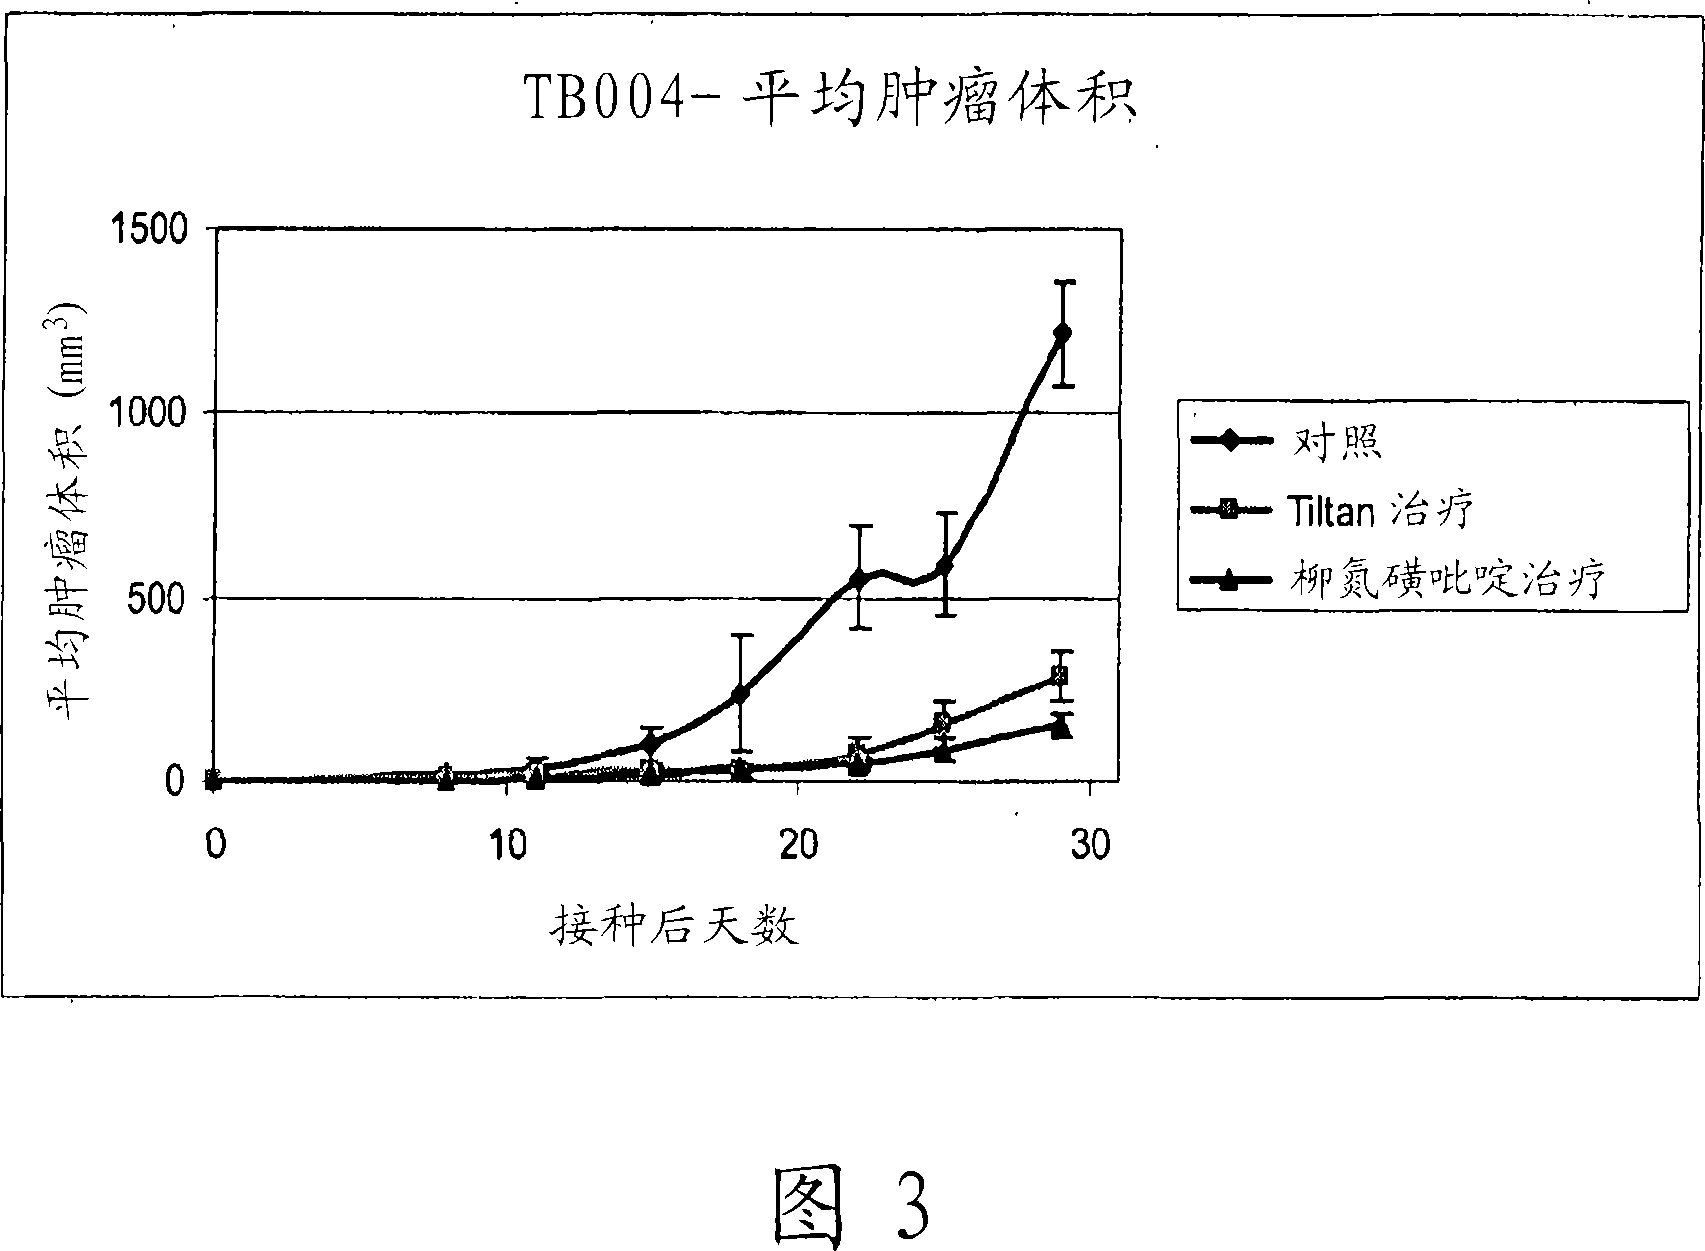 Method and composition for enhancing anti-angiogenic therapy